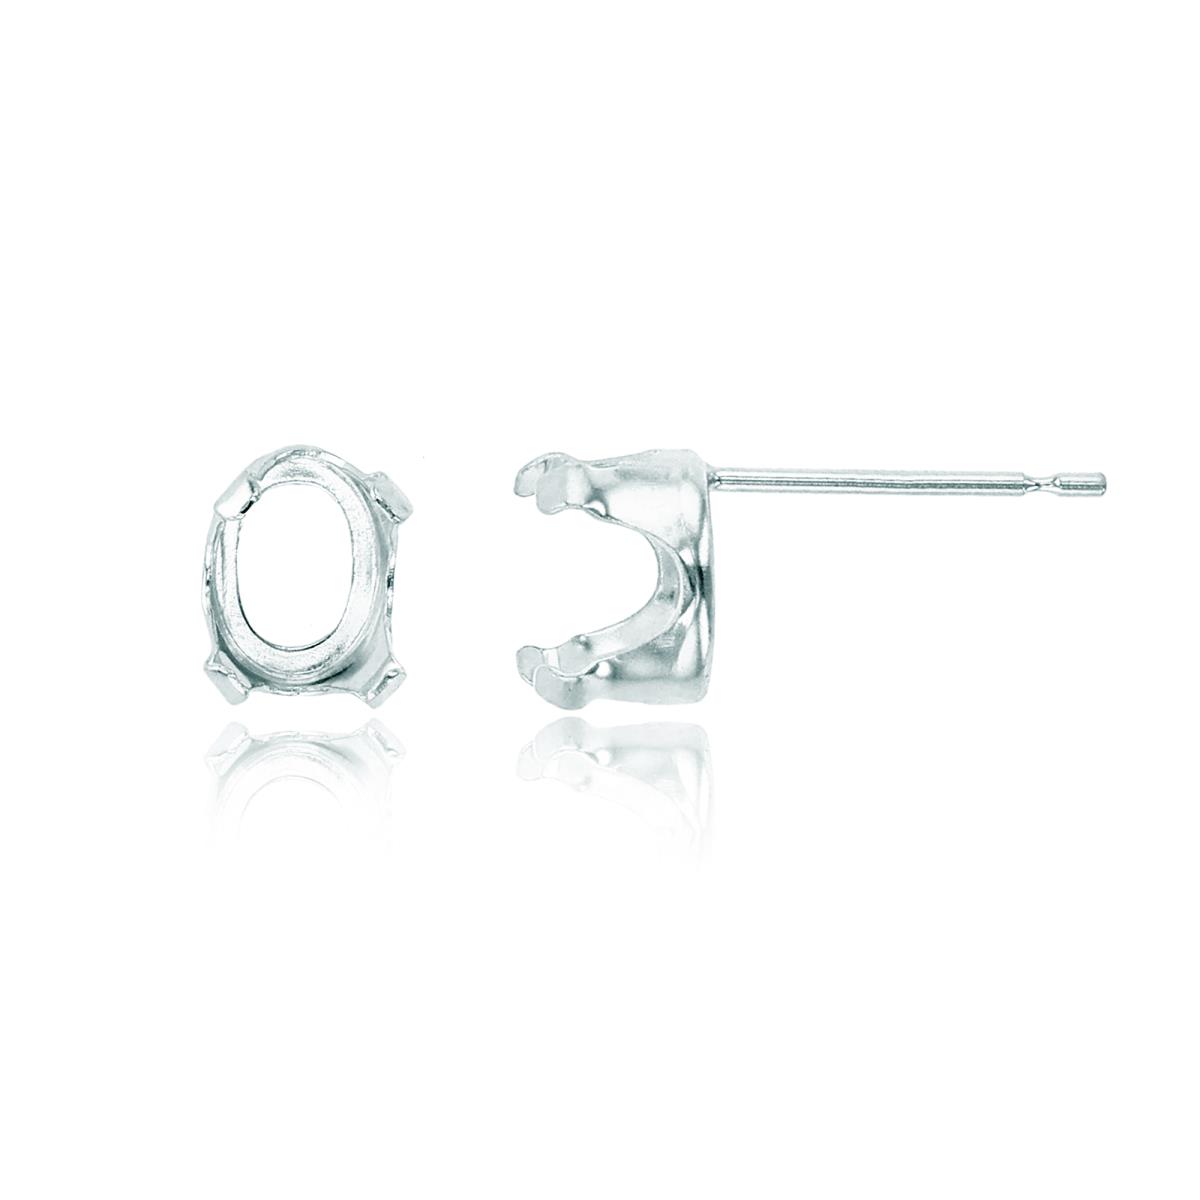 10K White Gold 5x3mm Oval 4-Prong Stud Finding (PR)